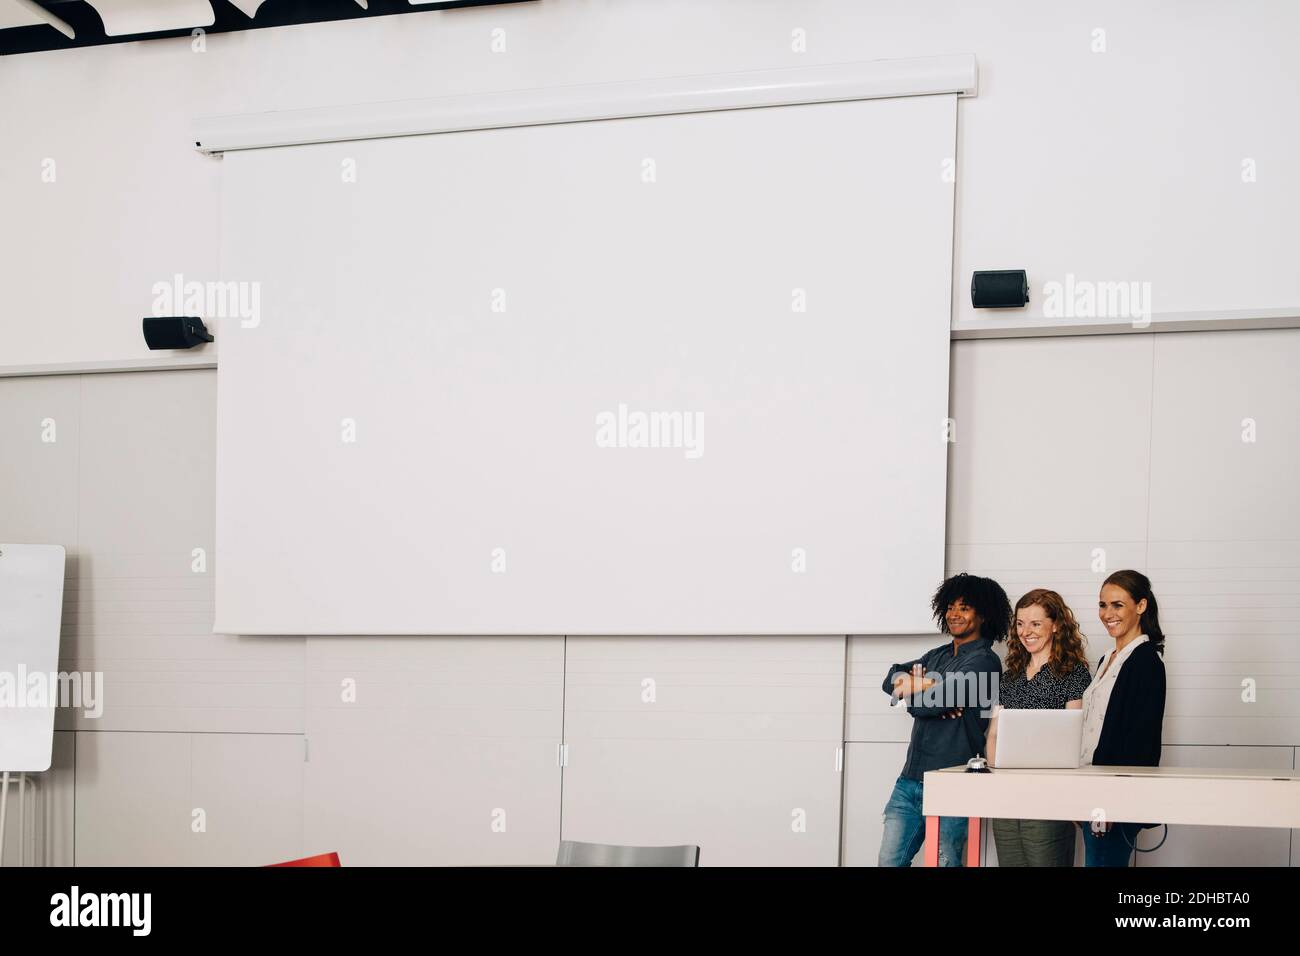 Smiling multi-ethnic technicians standing by blank projection screen at creative office Stock Photo